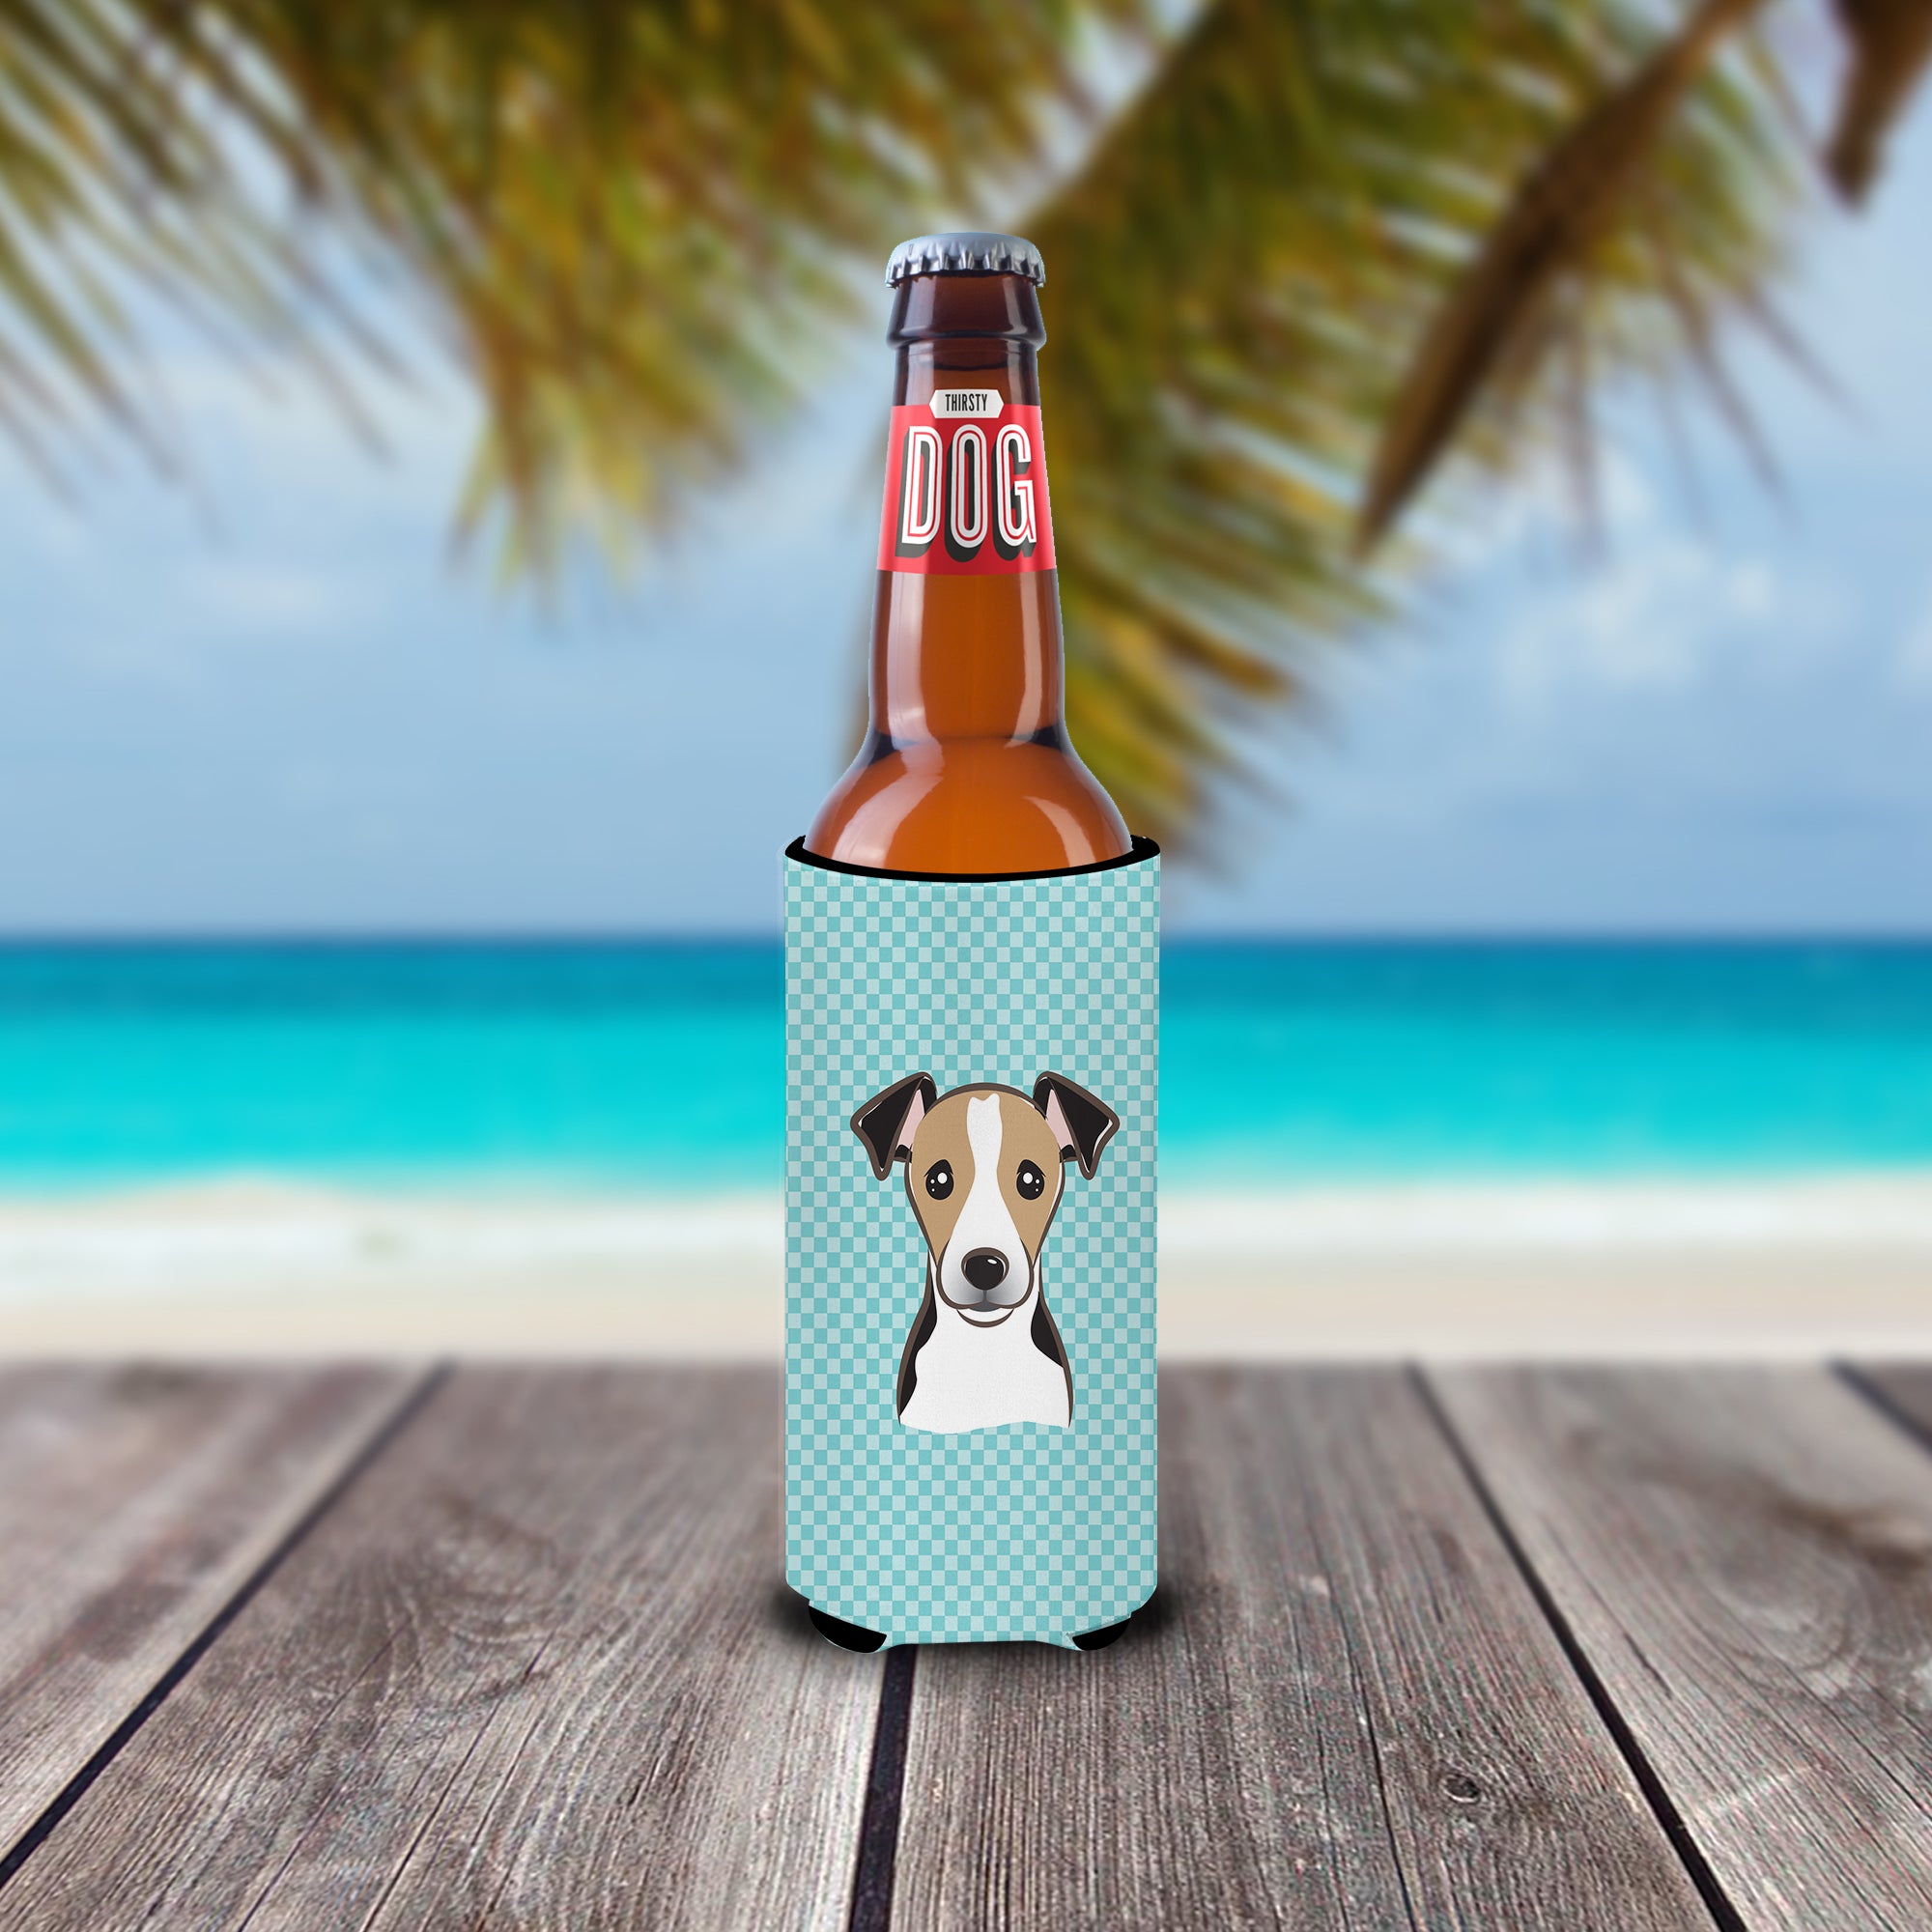 Checkerboard Blue Jack Russell Terrier Ultra Beverage Insulators for slim cans